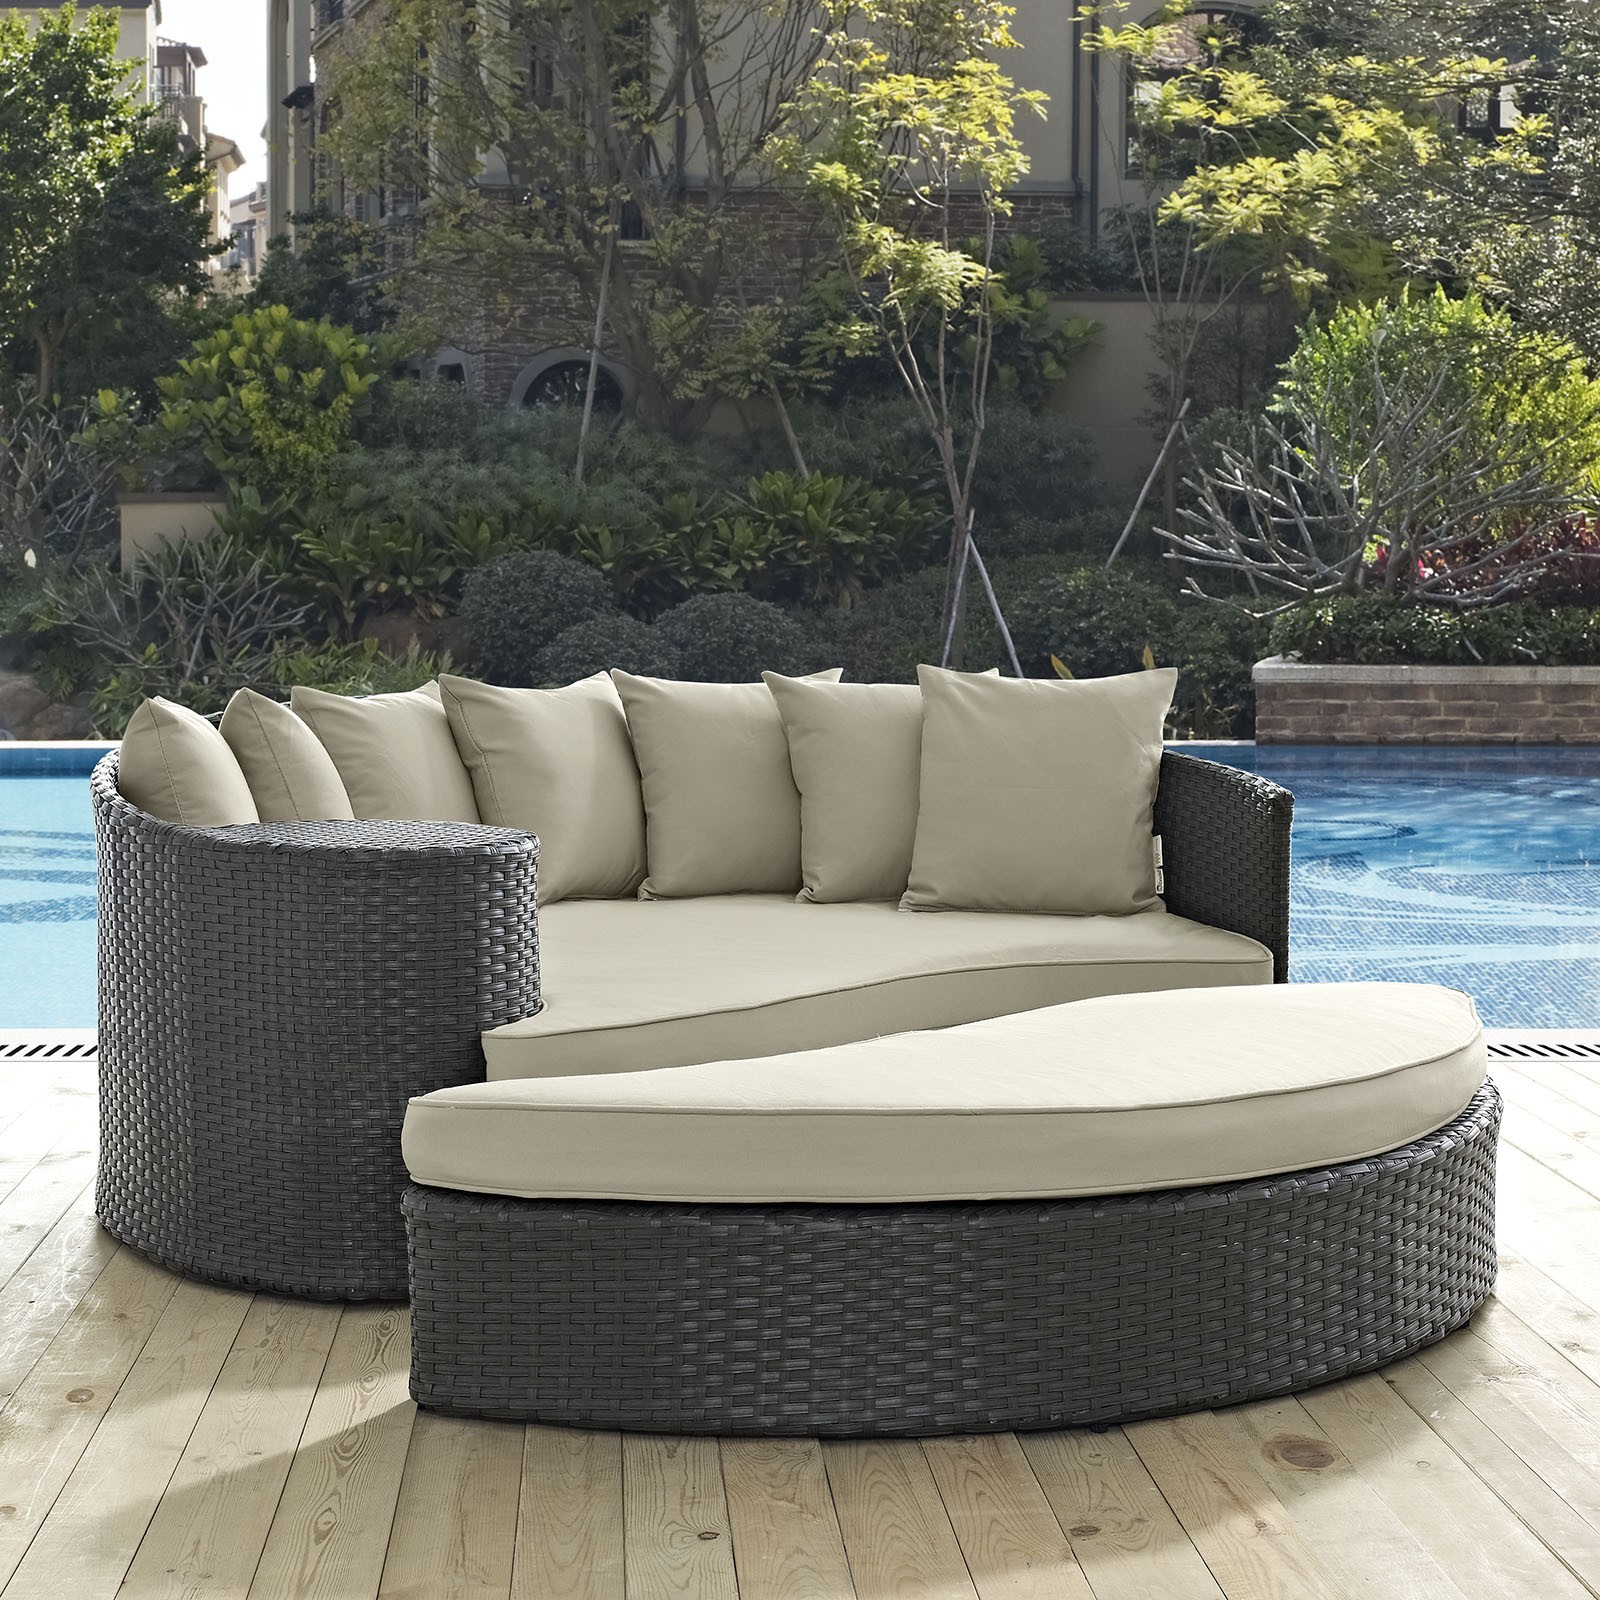 Modway sojourn wicker 2 piece outdoor daybed set outdoor